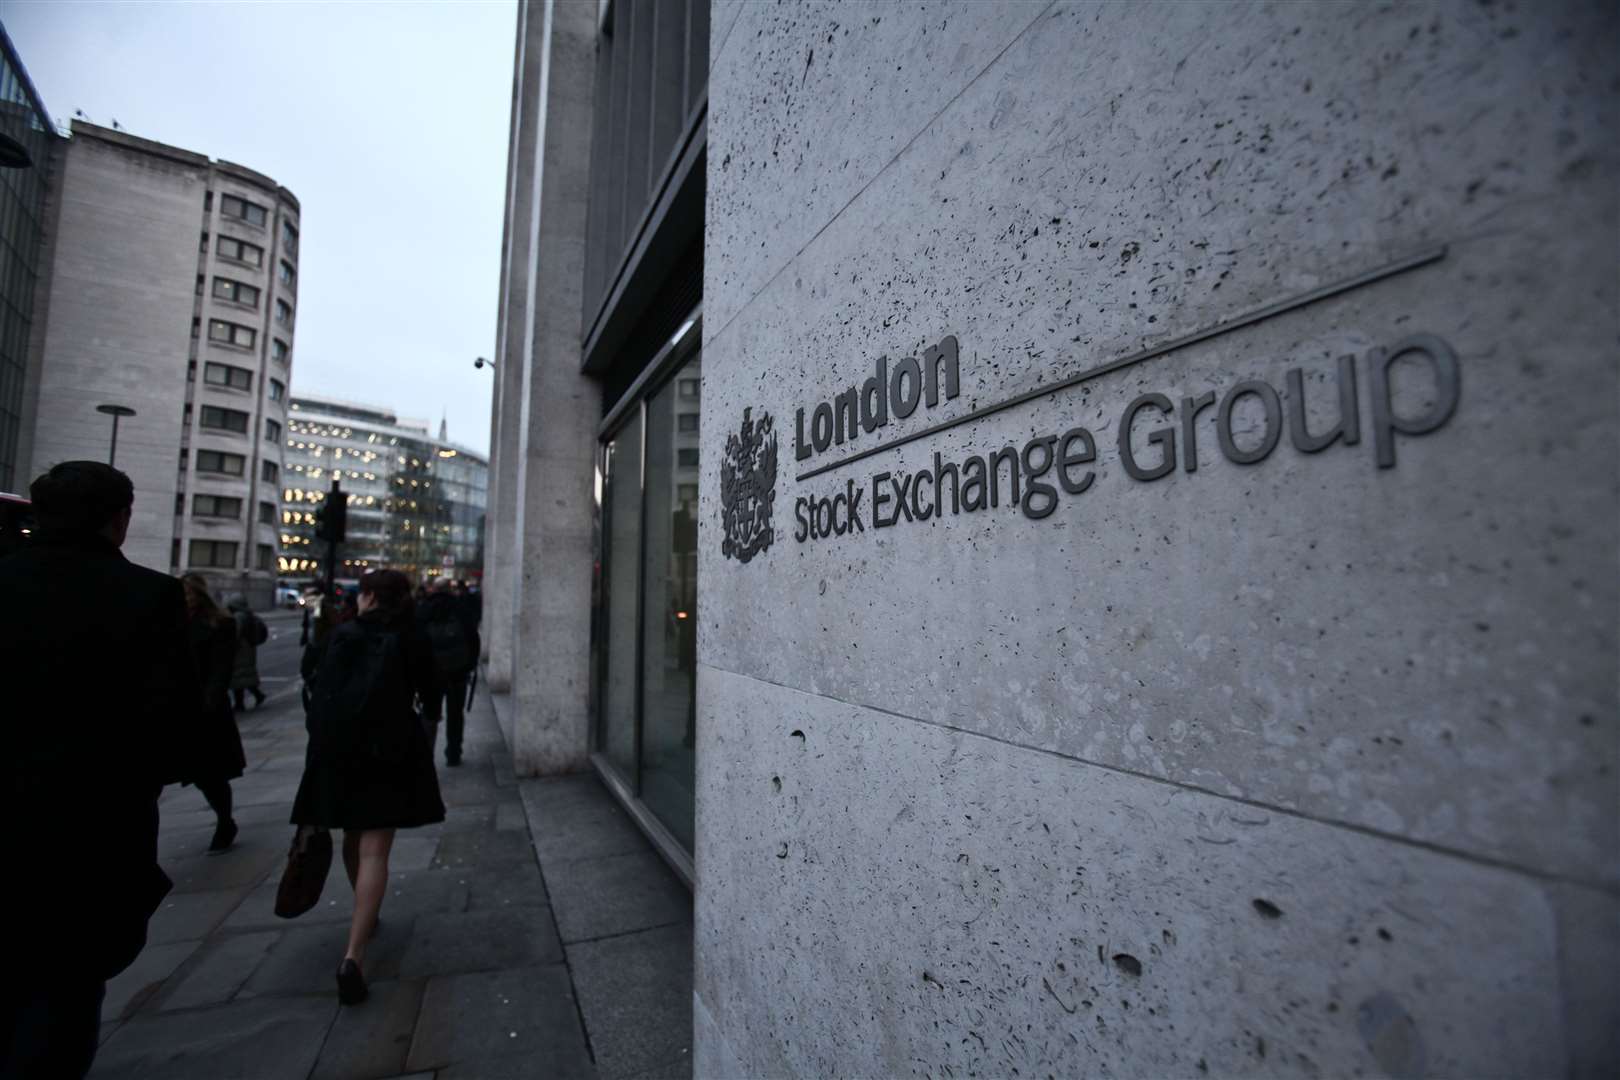 Shortly after 10am, London Stock Exchange Group said in a notice that trading across all its markets had resumed (Alamy/PA)